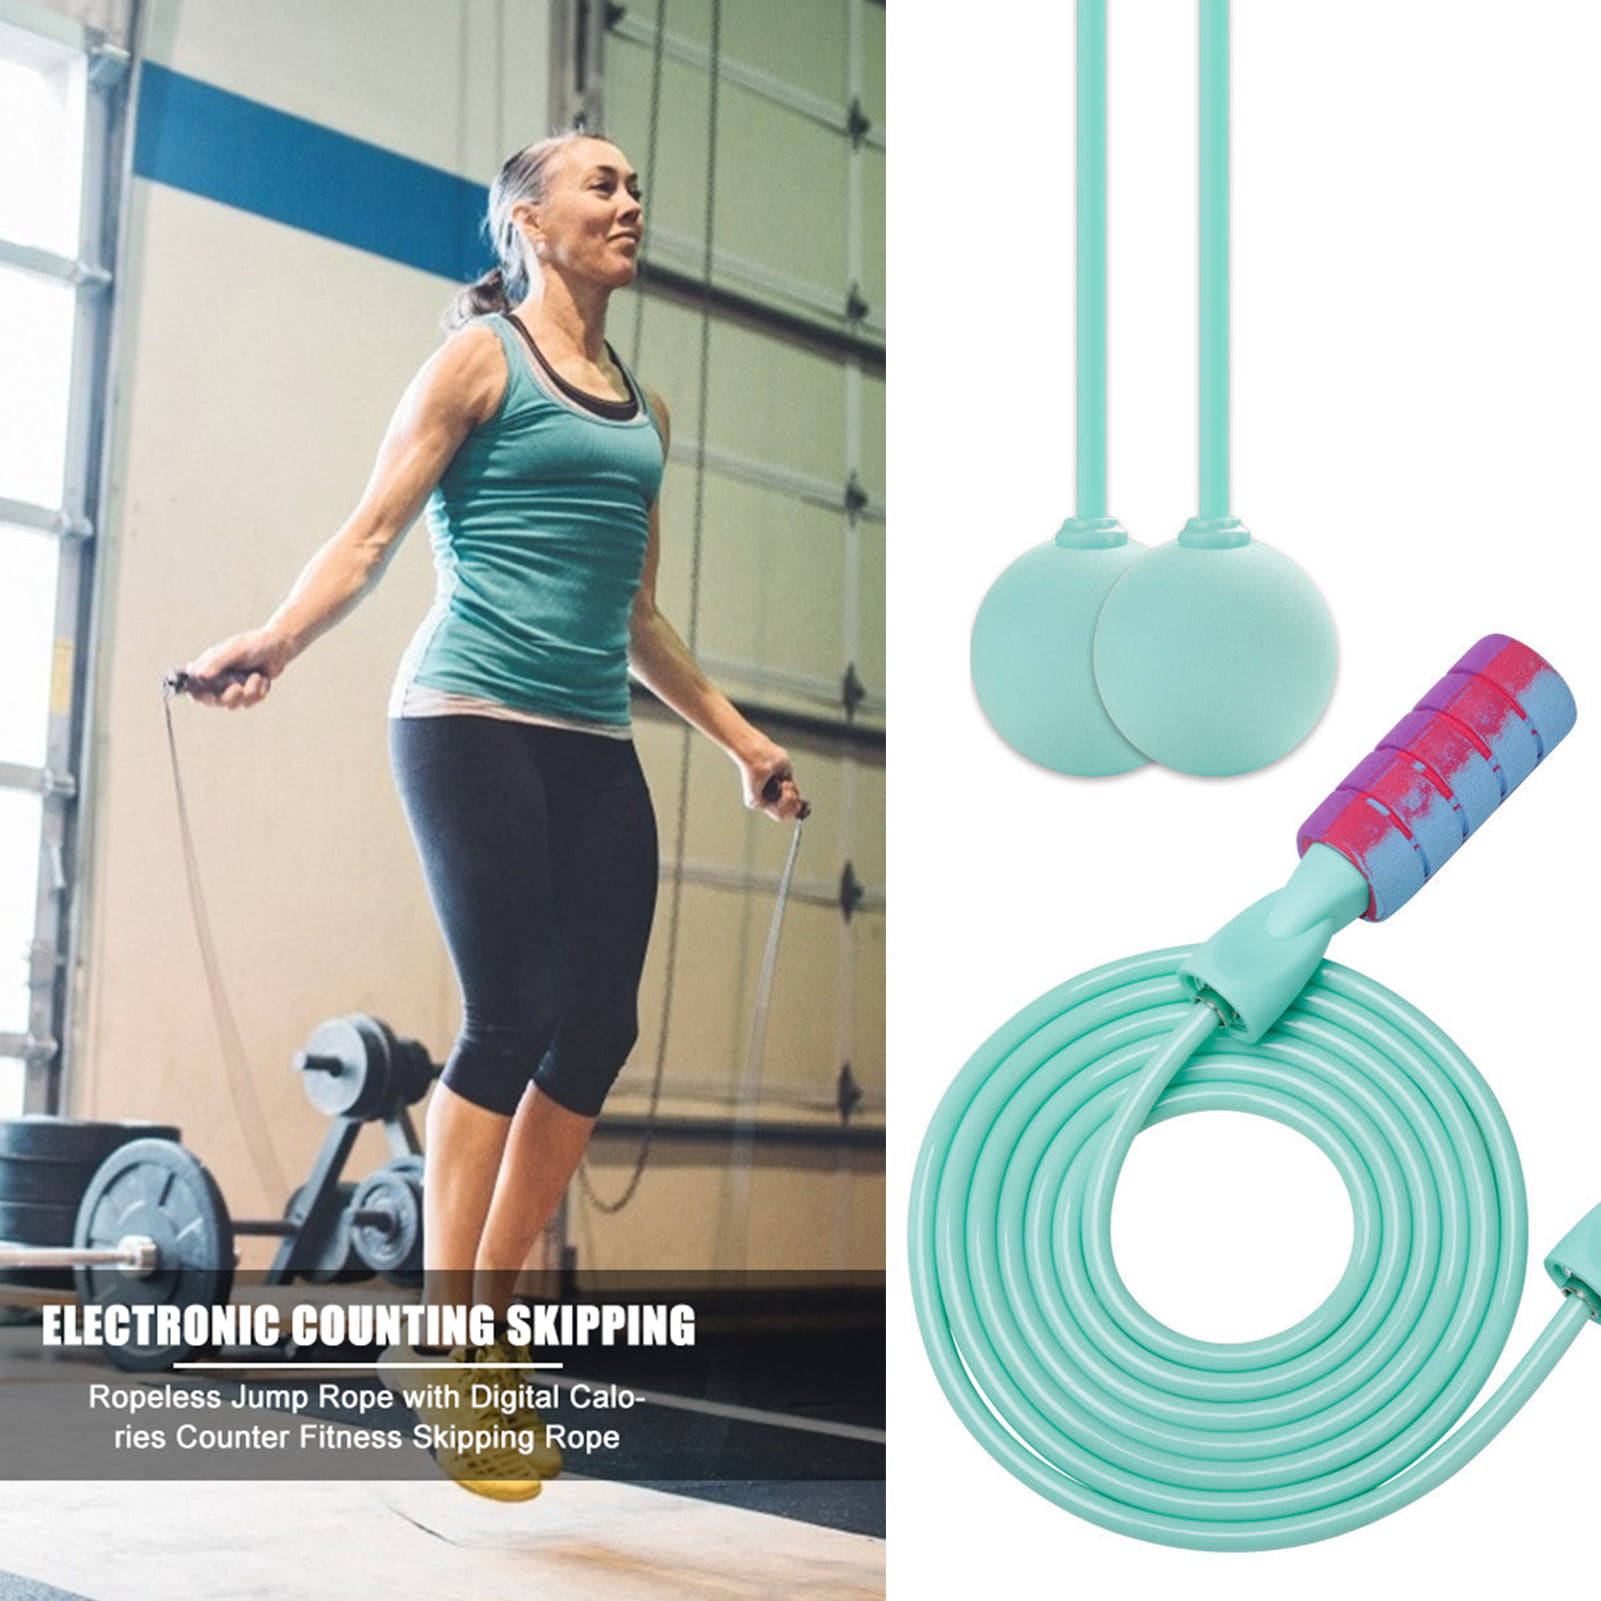 Details about   Gym Aerobic Exercise Skipping Jump Rope Digital Counting Speed Timer Fitness NEW 